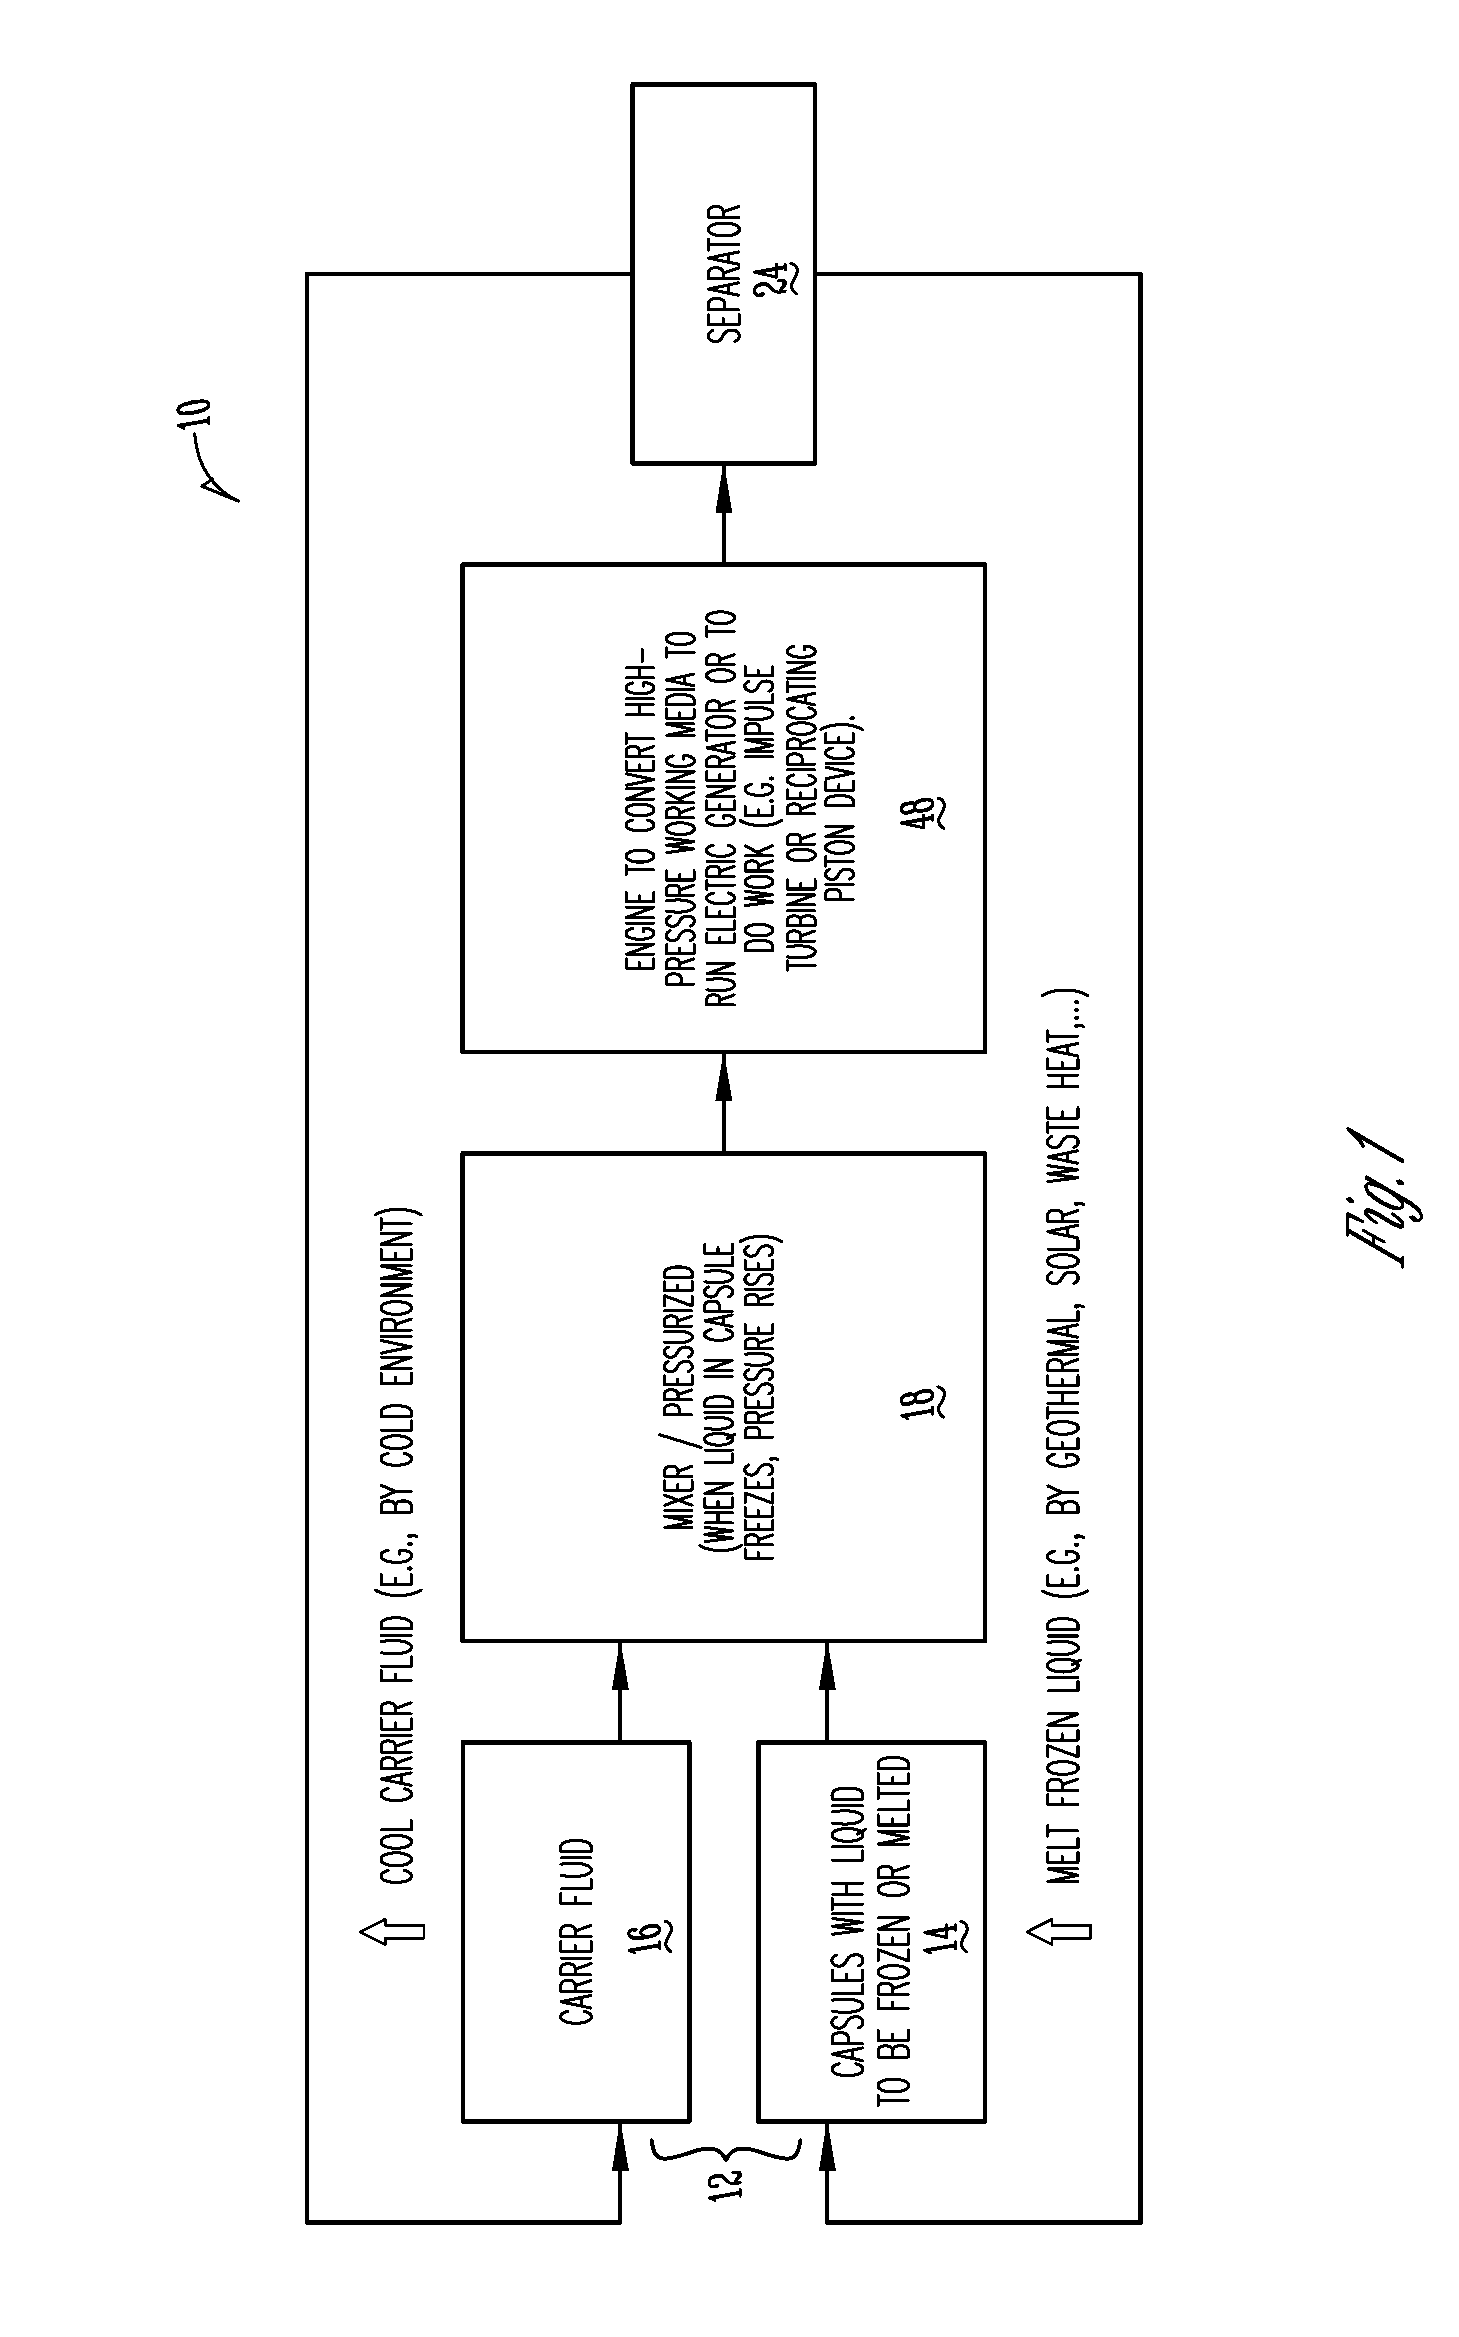 Method and apparatus for energy harvesting through phase-change induced pressure rise under cooling conditions